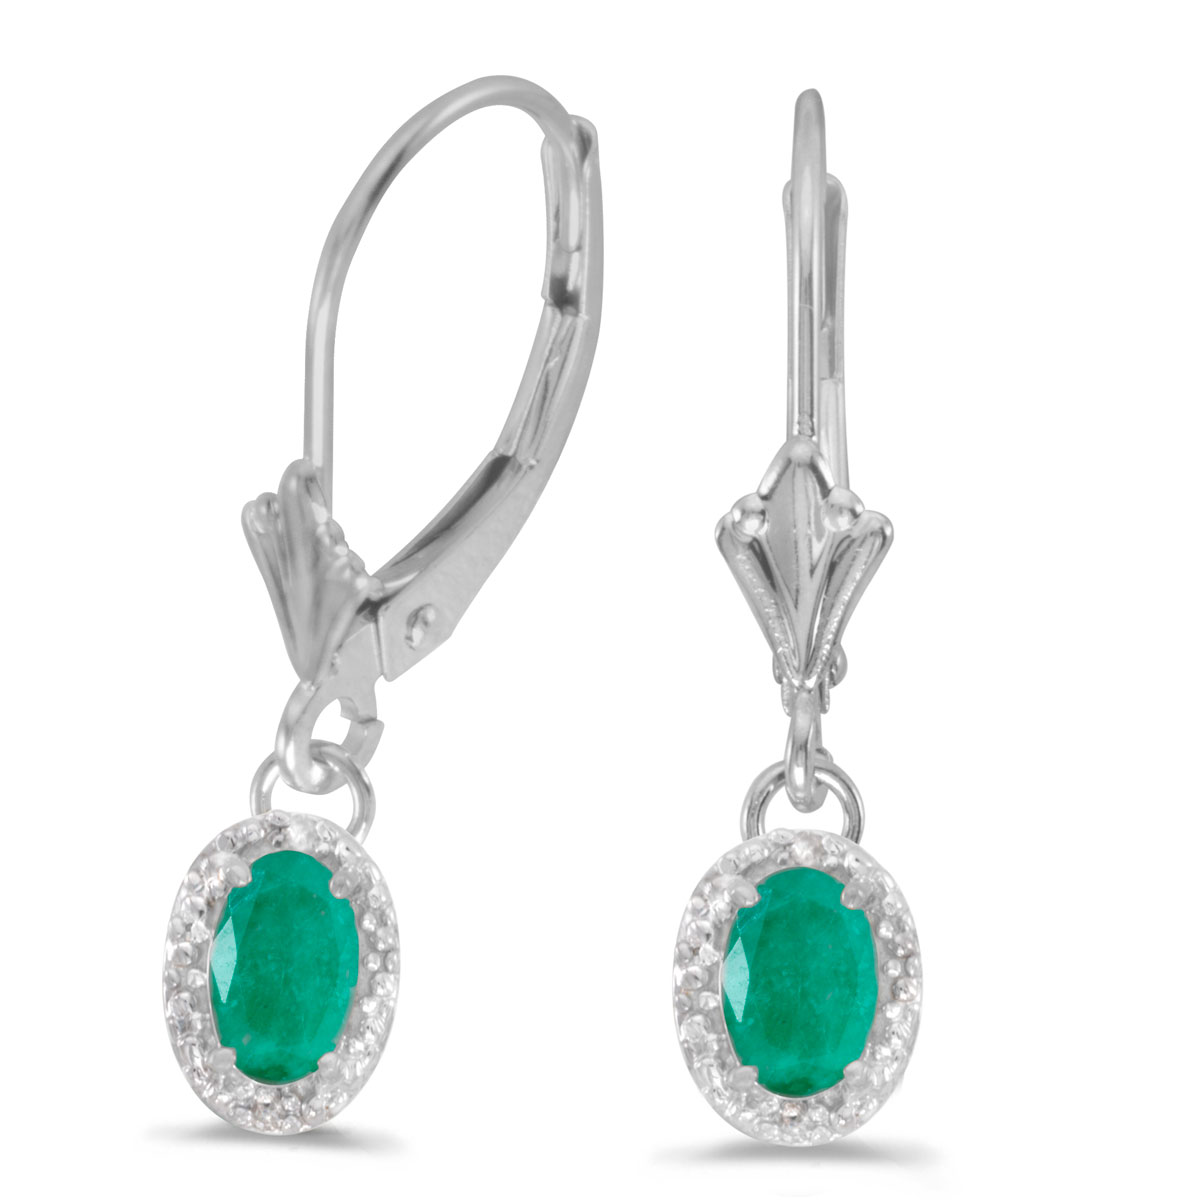 JCX2125: Beautiful 10k white gold leverback earrings with regal 6x4 mm emeralds complemented with bright diamonds.